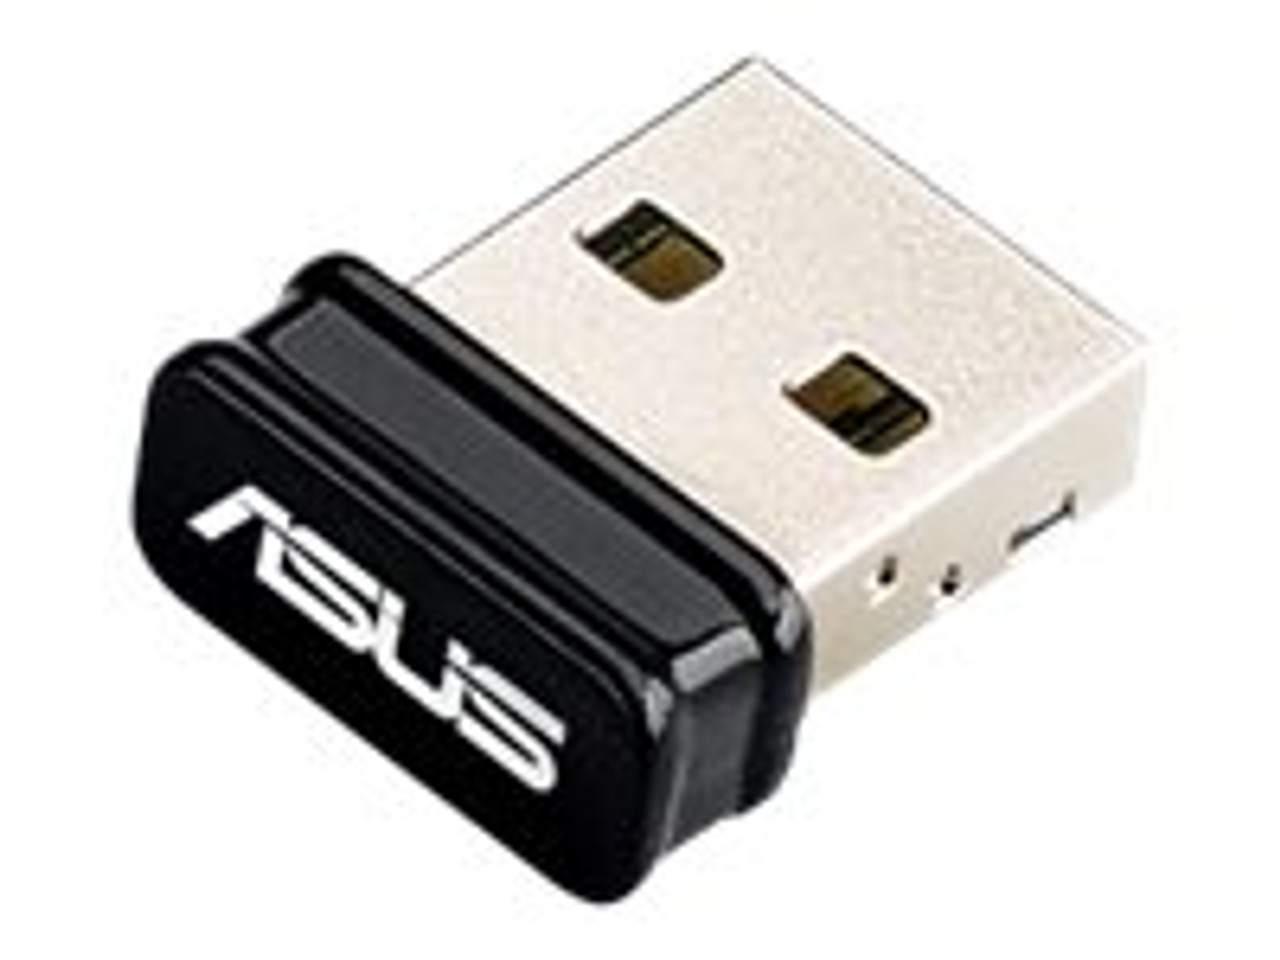 Asus USB-AC53 Nano IEEE 802.11ac Wi-Fi Adapter for Notebook